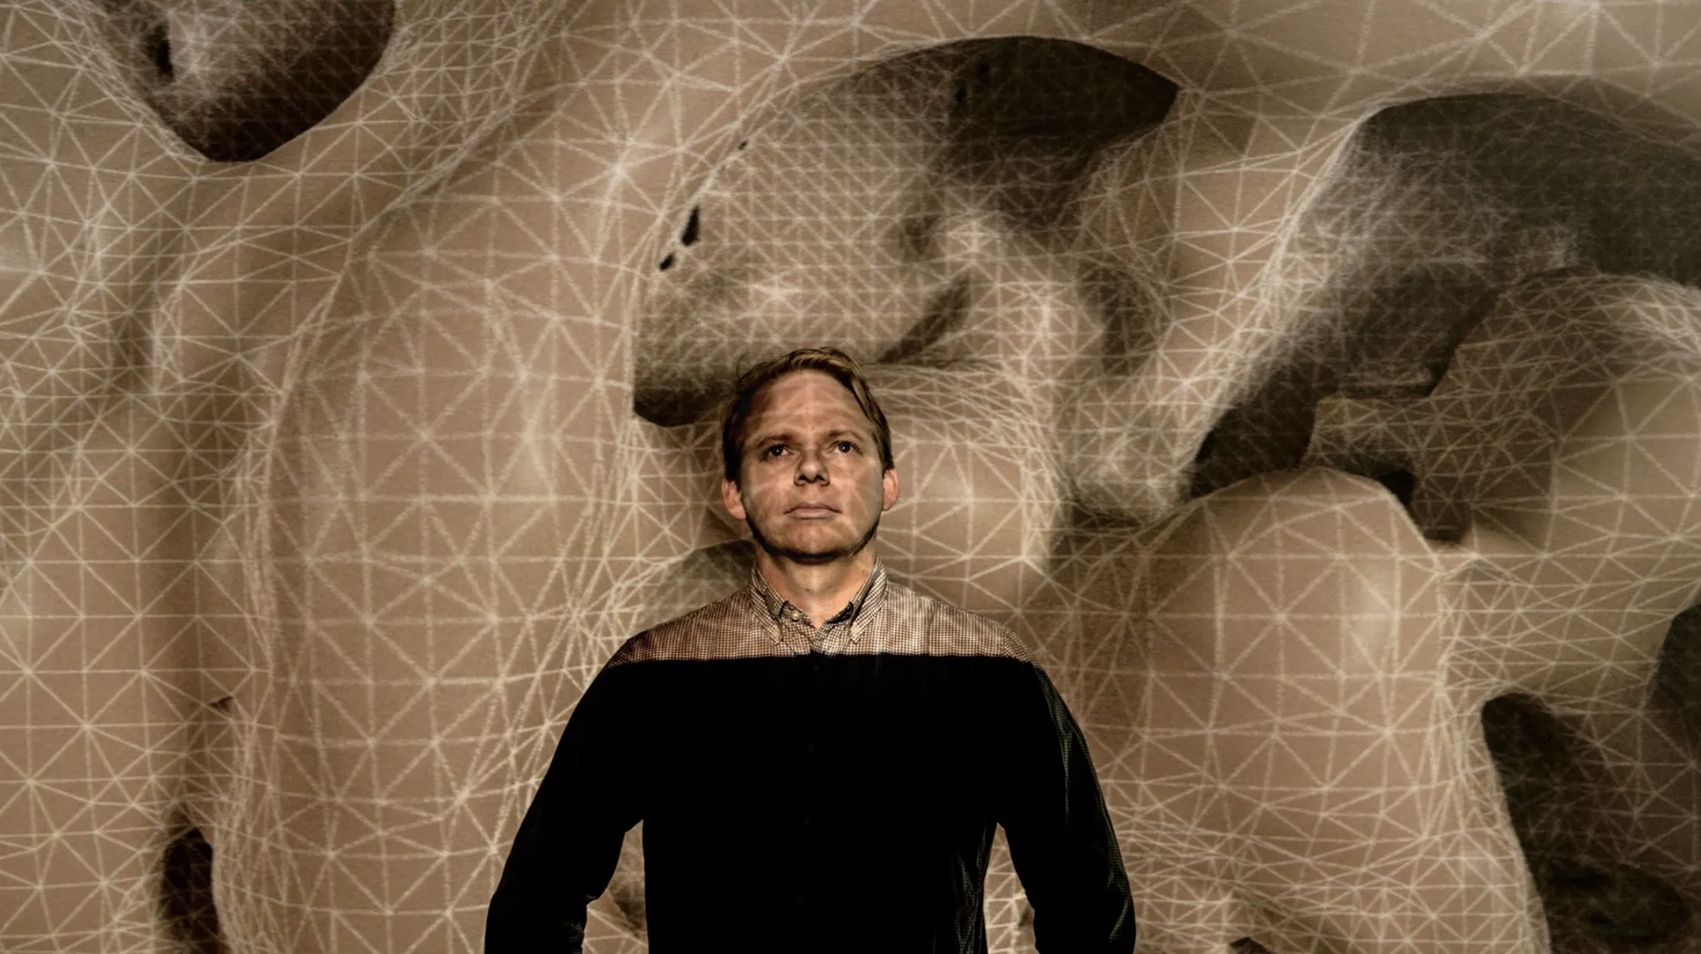 Baden Pailthorpe standing in front of his work Clanger, a projected topology of gridded land forms